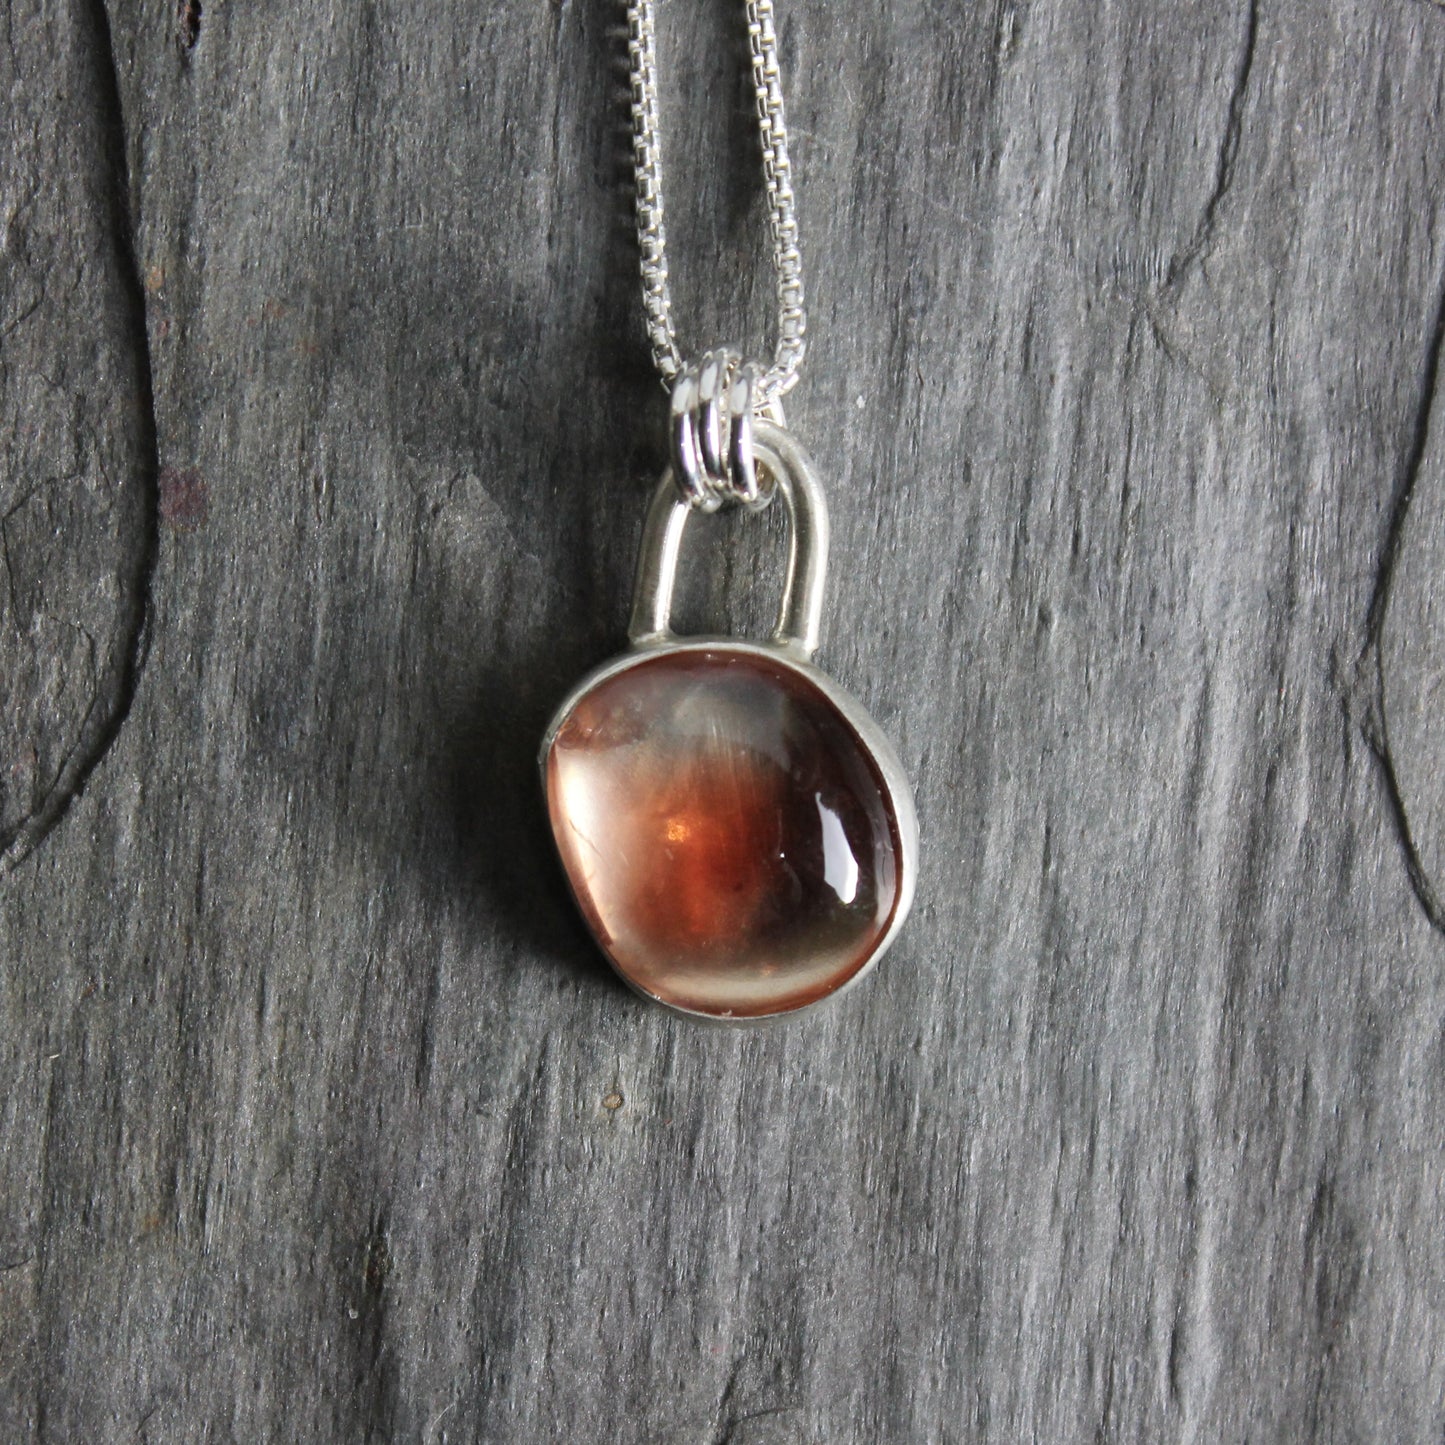 Handmade sterling silver red Oregon sunstone cabochon set in a fine and sterling silver bezel setting on a sterling silver chain.